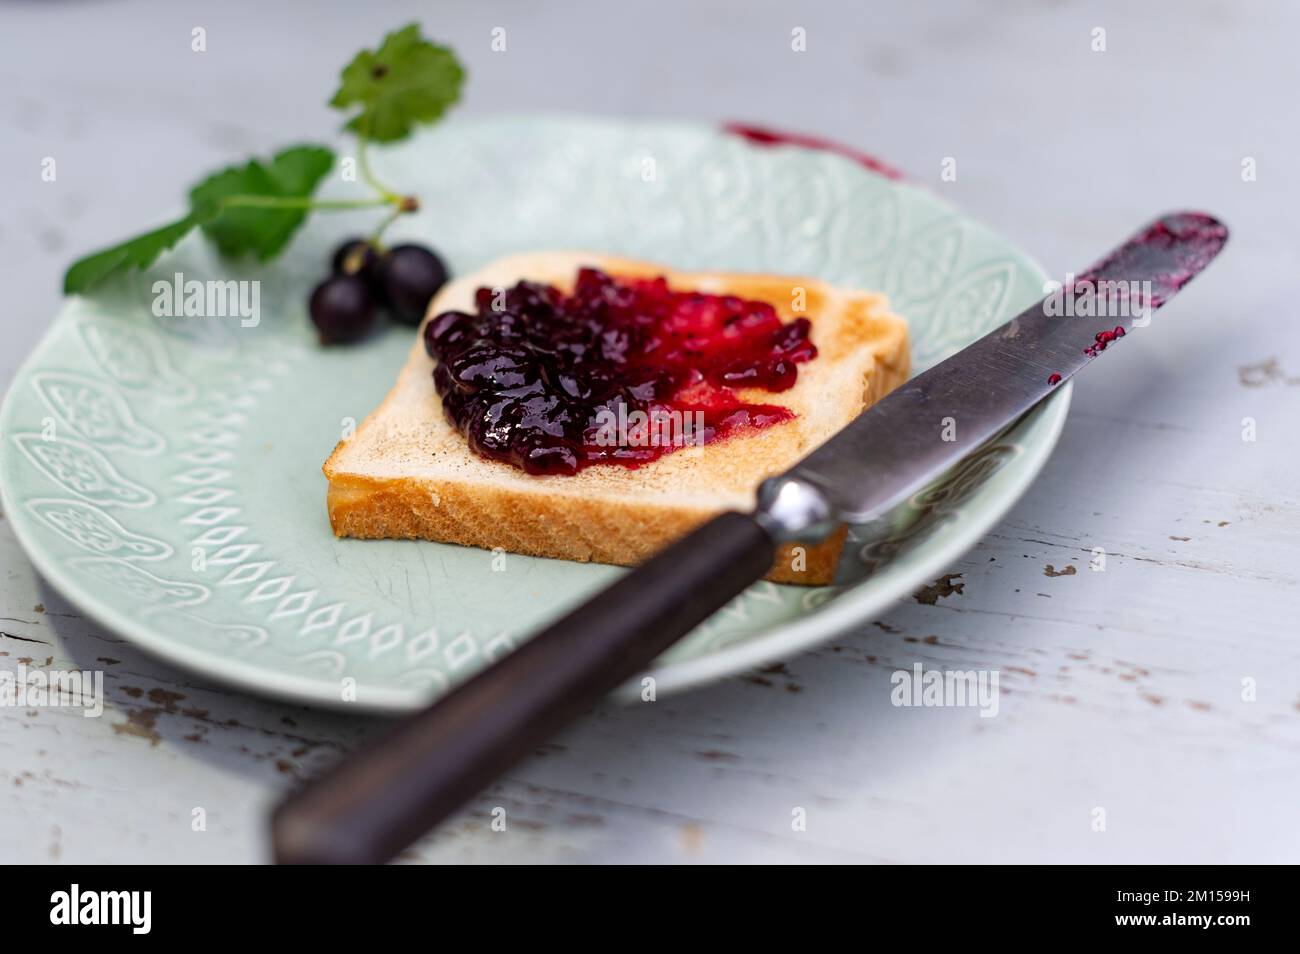 Toasted bread with black currant jam Stock Photo